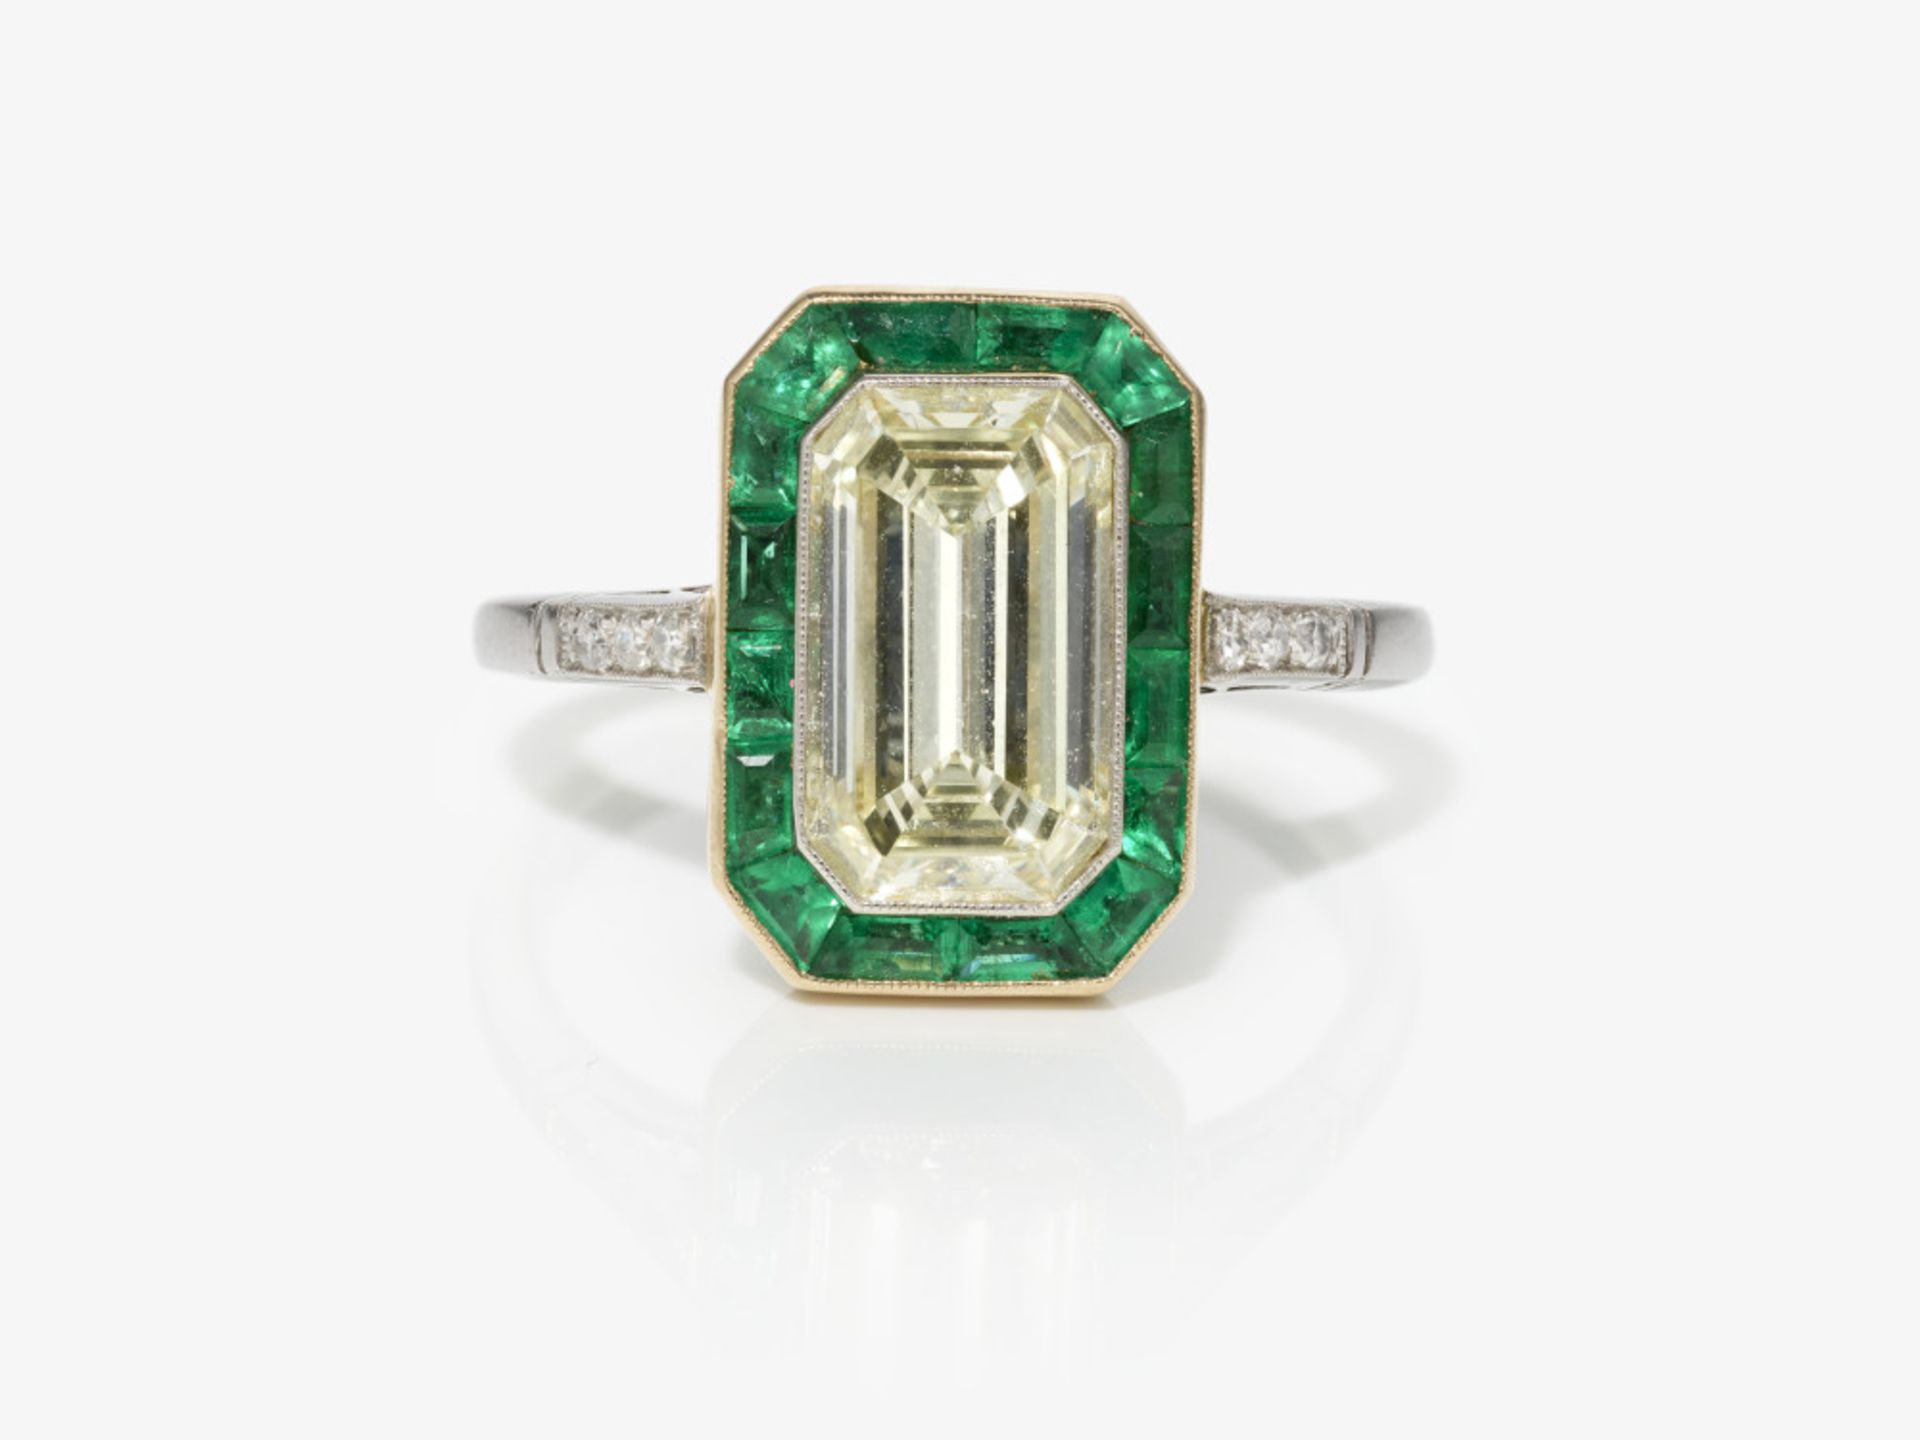 A historical fine Entourage ring decorated with a large emerald-cut diamond and emeralds - England,  - Image 2 of 2